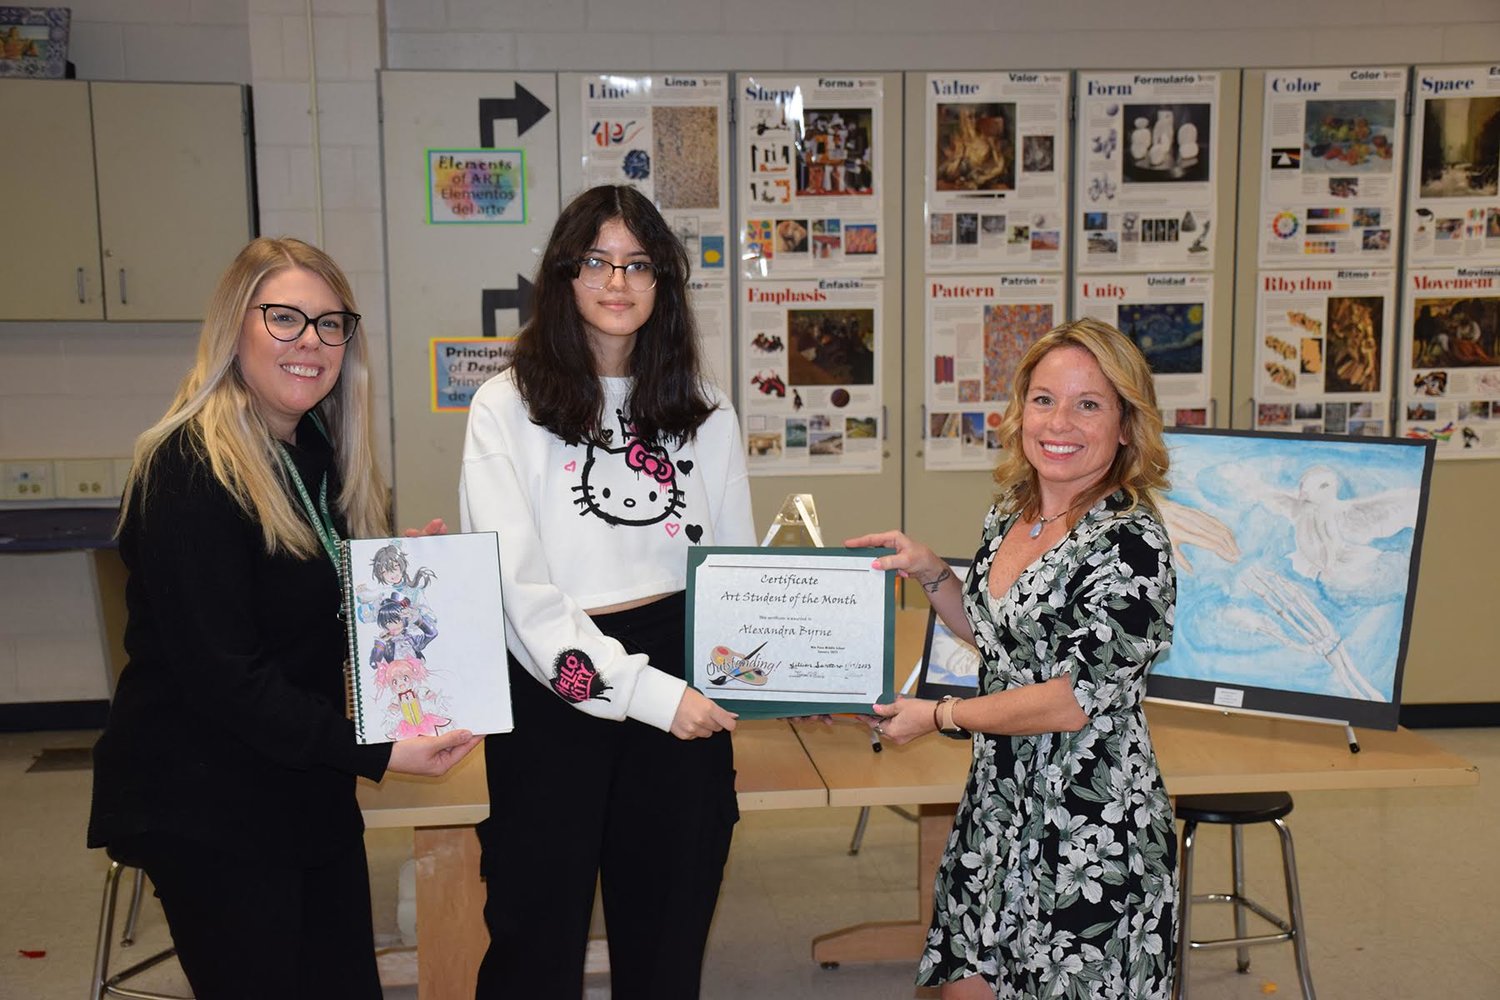 William Paca Middle School eighth-grade student Alexandra Byrne is the William Floyd “Artist of the Month” for January! Alexandra is pictured with her teacher, Jillian Santoro (left), and Fine Arts chairperson, Theresa Bianco.